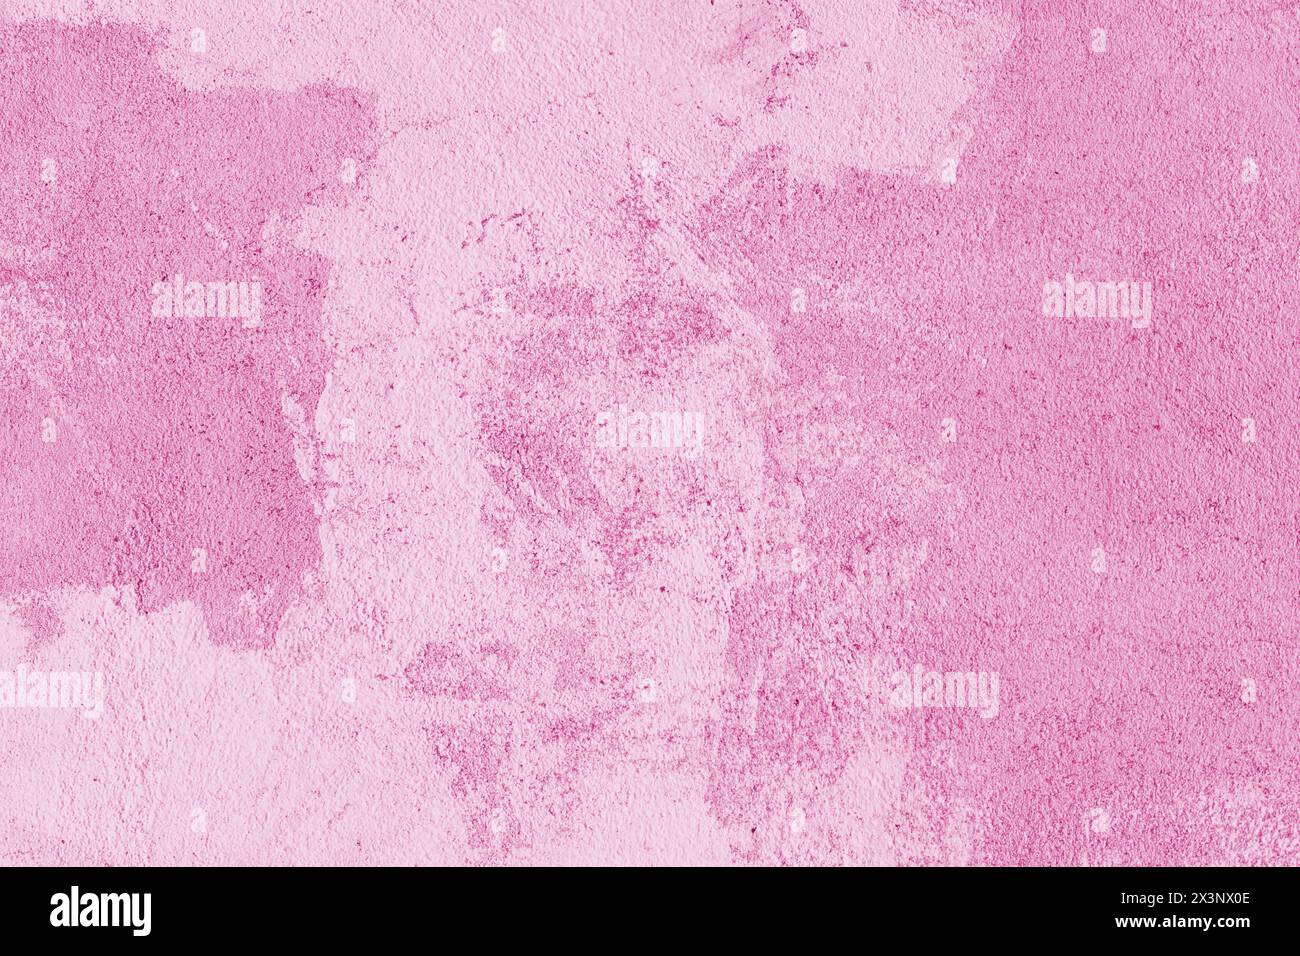 Old stucco plaster surface, concrete wall background, close up grunge texture of pink painted cement texture. Wallpaper, backdrop, architecture design Stock Photo